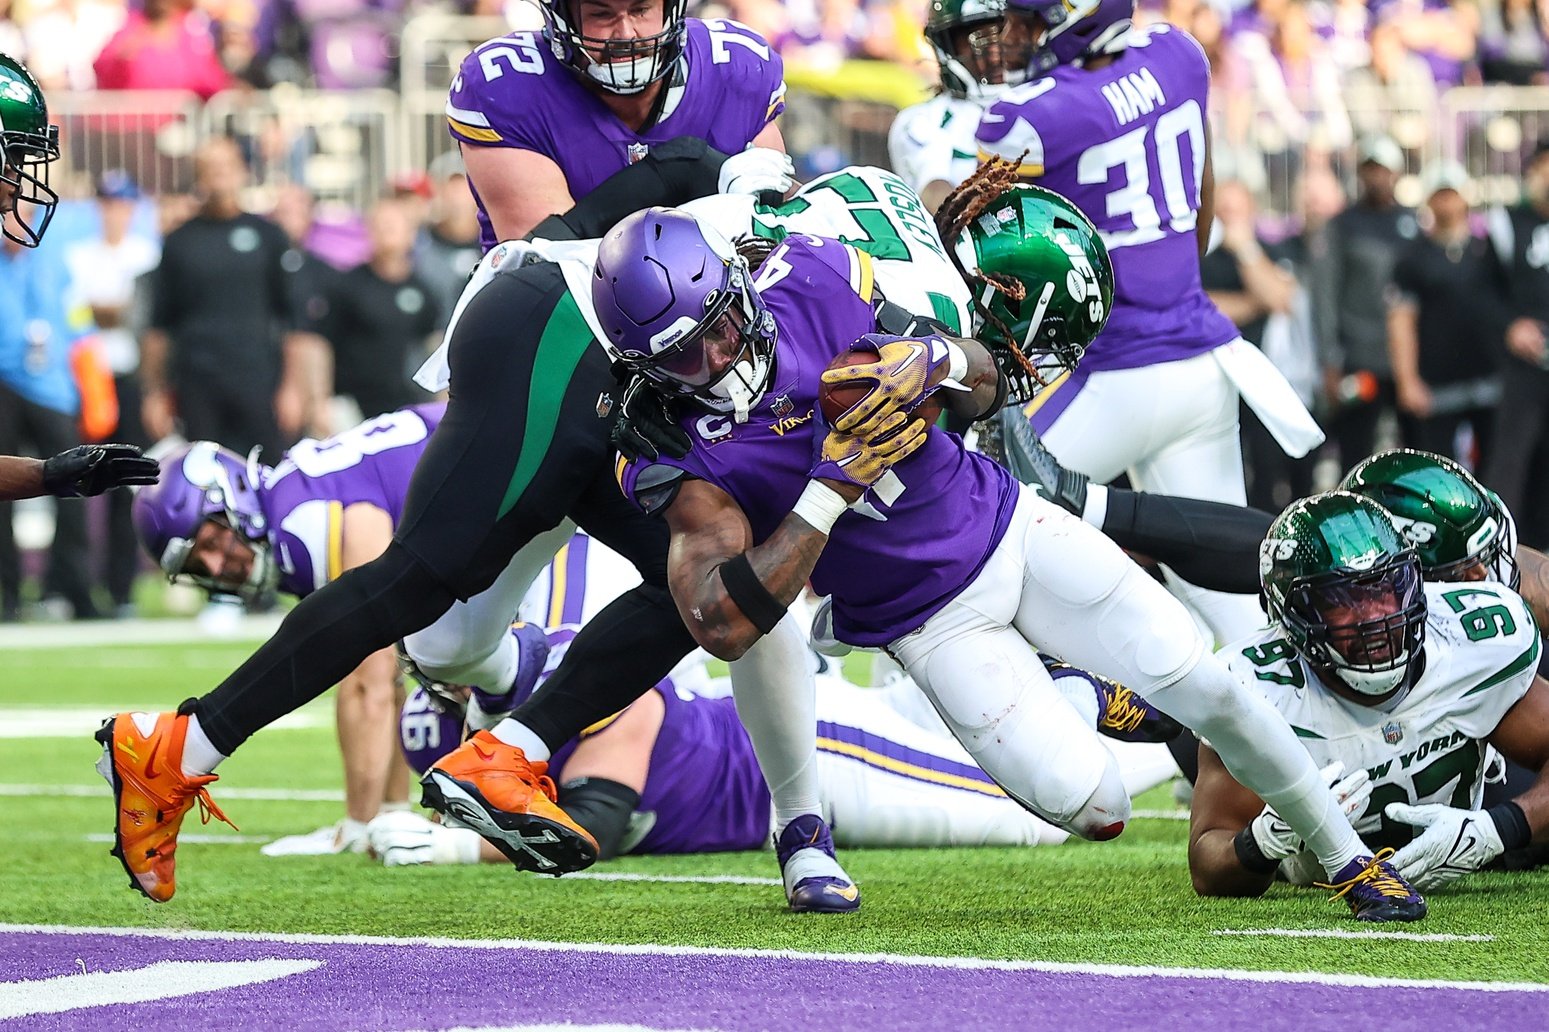 Running back Dalvin Cook (4) pushes into the end zone against the New York Jets.